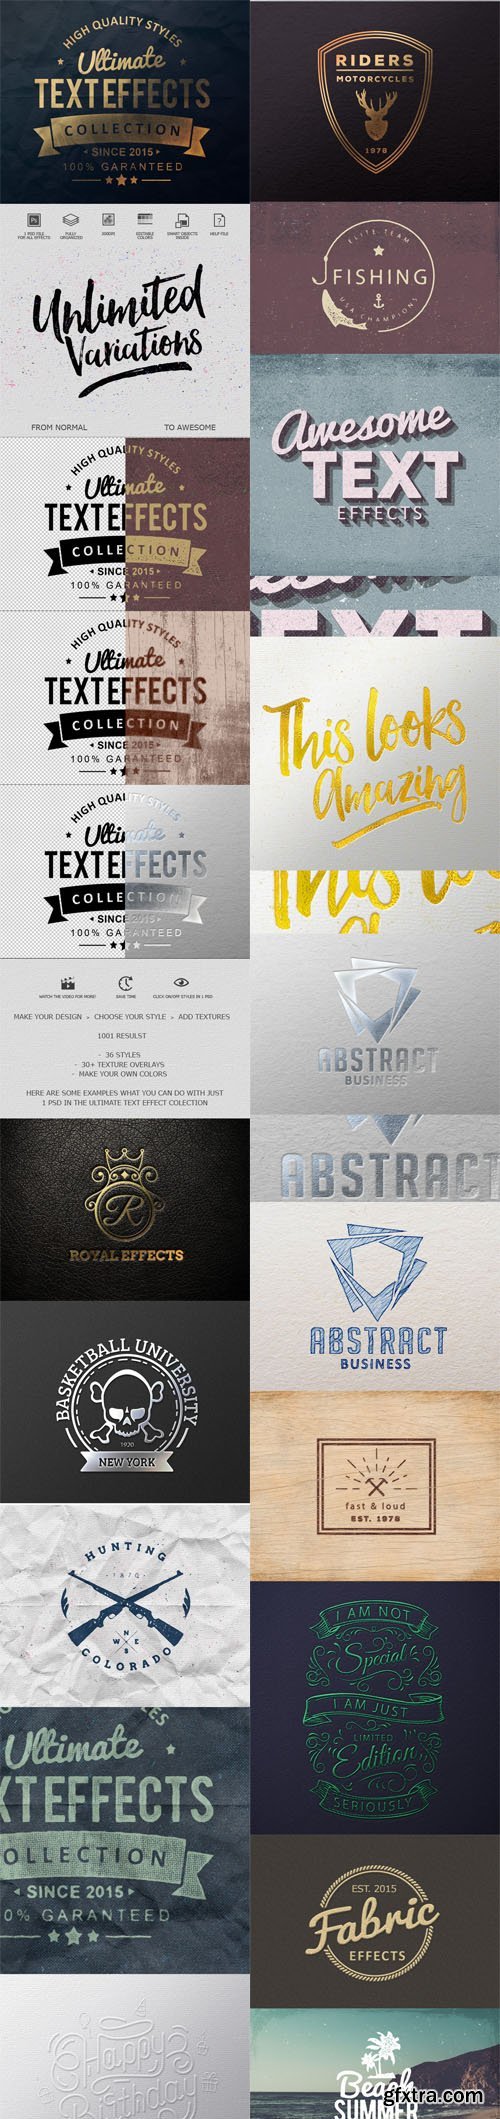 Graphicriver Ultimate Text Effect Collection 12937488